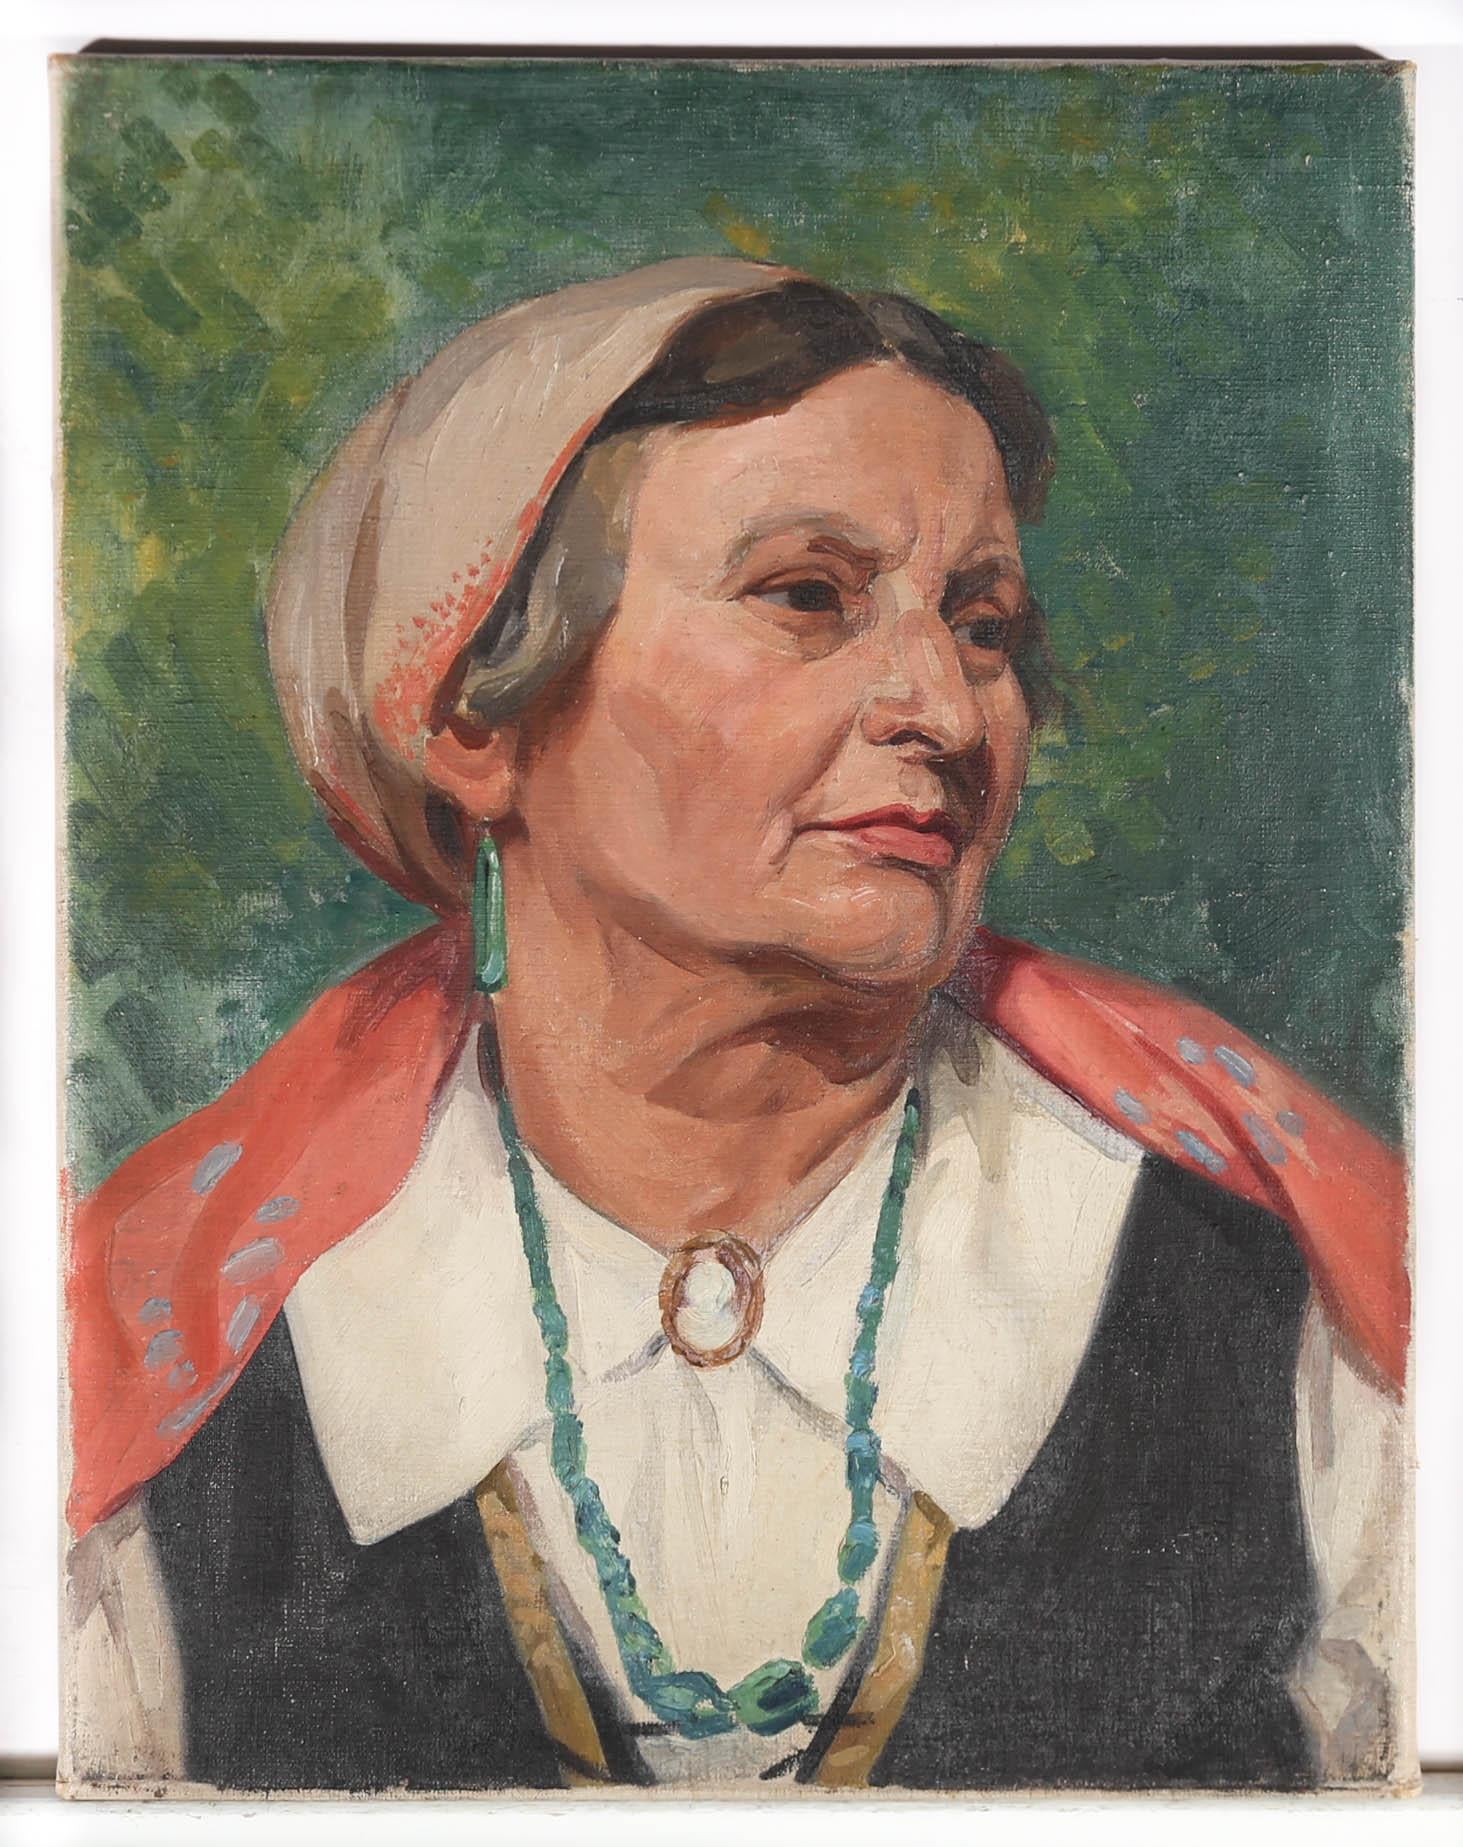 A striking Mid Century portrait of wonderful quality, showing a distinctive looking woman in traditional eastern European dress. In the style typical for this artist, the focus on textile pattern and colour add great character to the portrait.